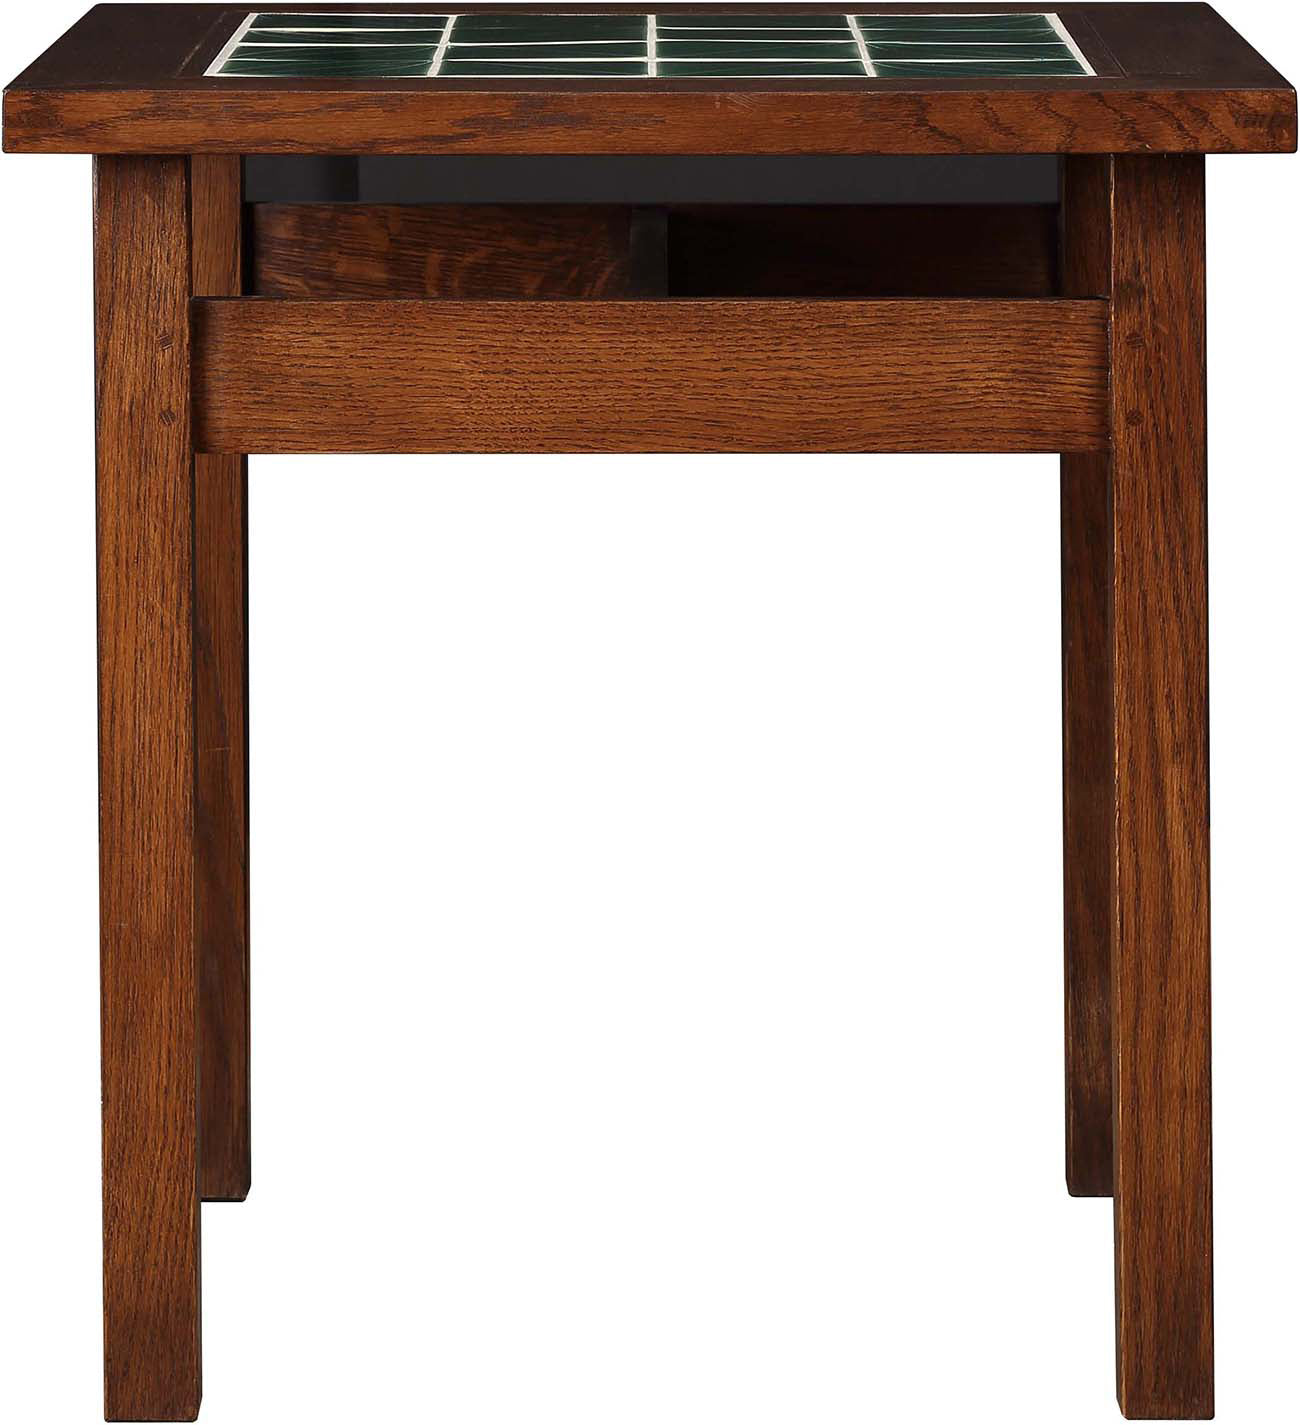 Tile Top End Table - Stickley Brand